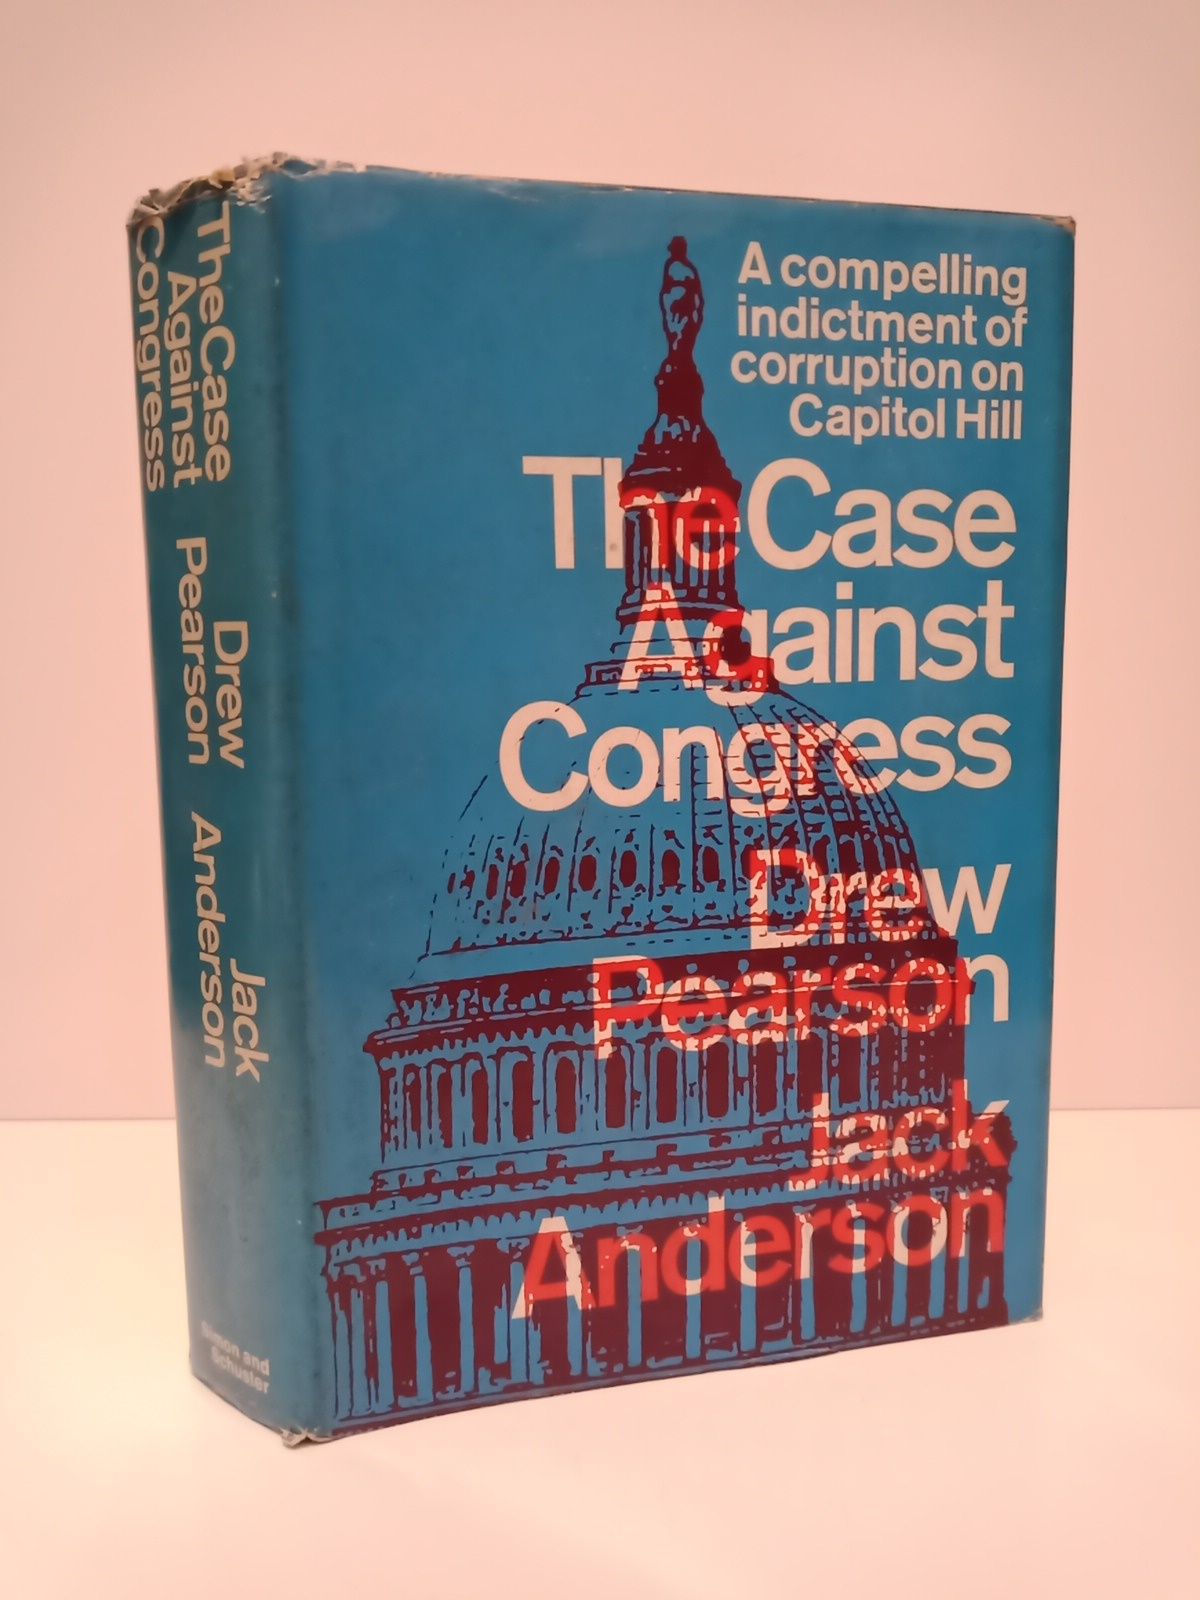 PEARSON, Drew y Jack Anderson - The case against Congress: A Compelling Indictment of Corruption on Capitol Hill